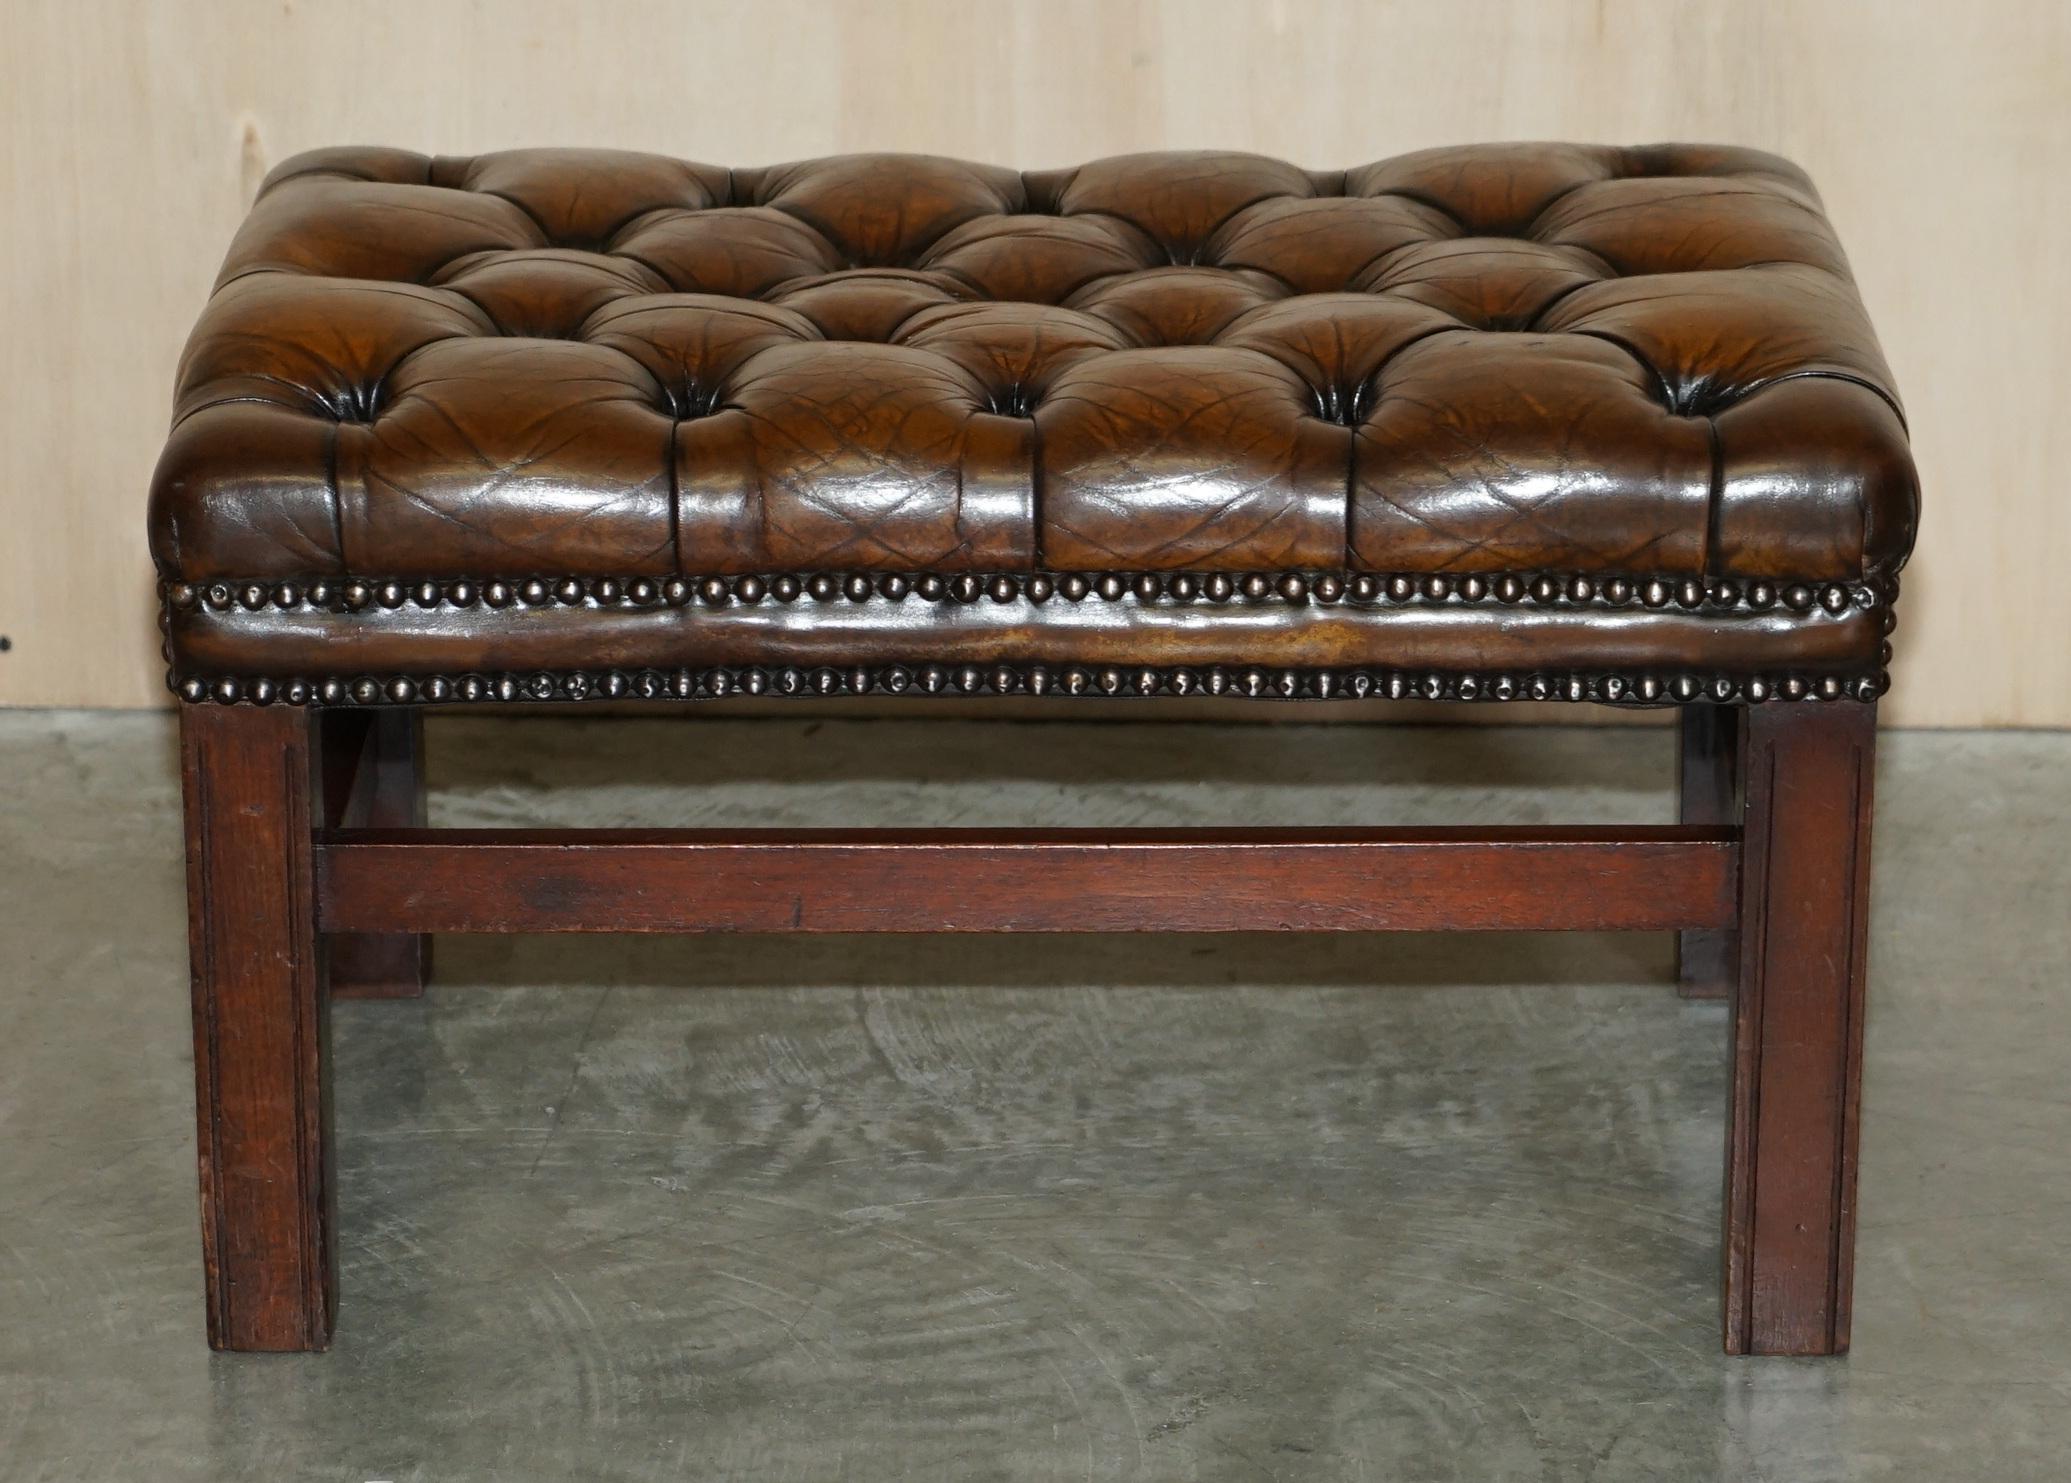 We are delighted to offer for sale this stunning, fully restored hand dyed cigar brown leather Chesterfield footstool.

A very good looking and well-made stool, it has been upholstered with high grade premium cattle hide leather which has been